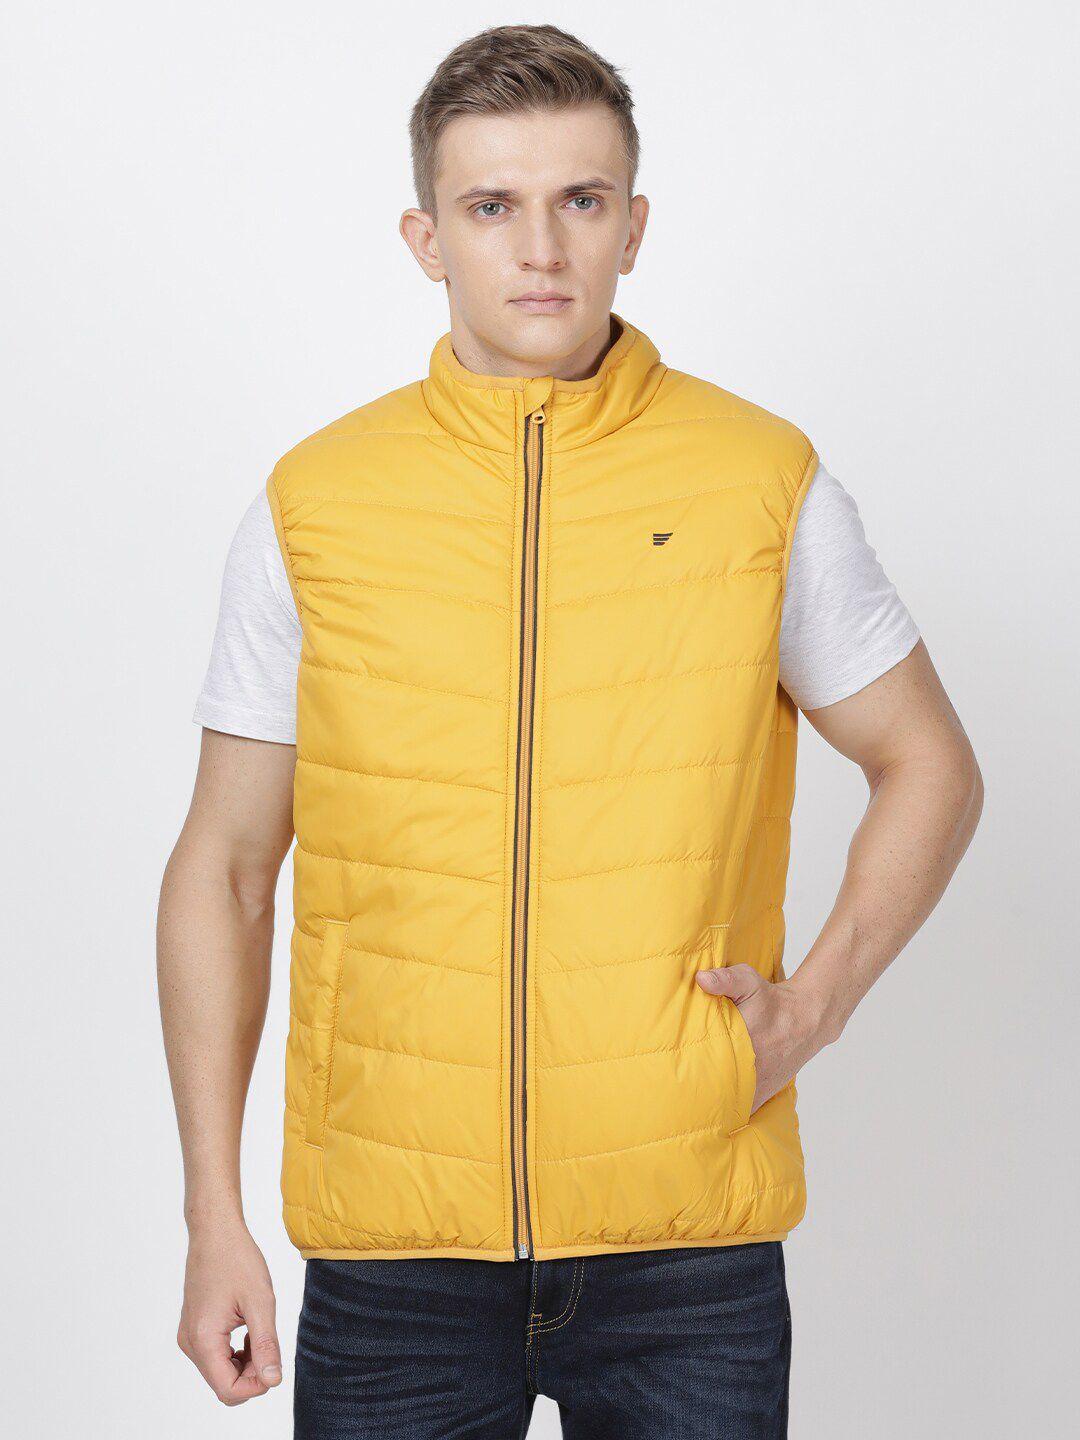 t-base-men-yellow-solid-lightweight-padded-jacket